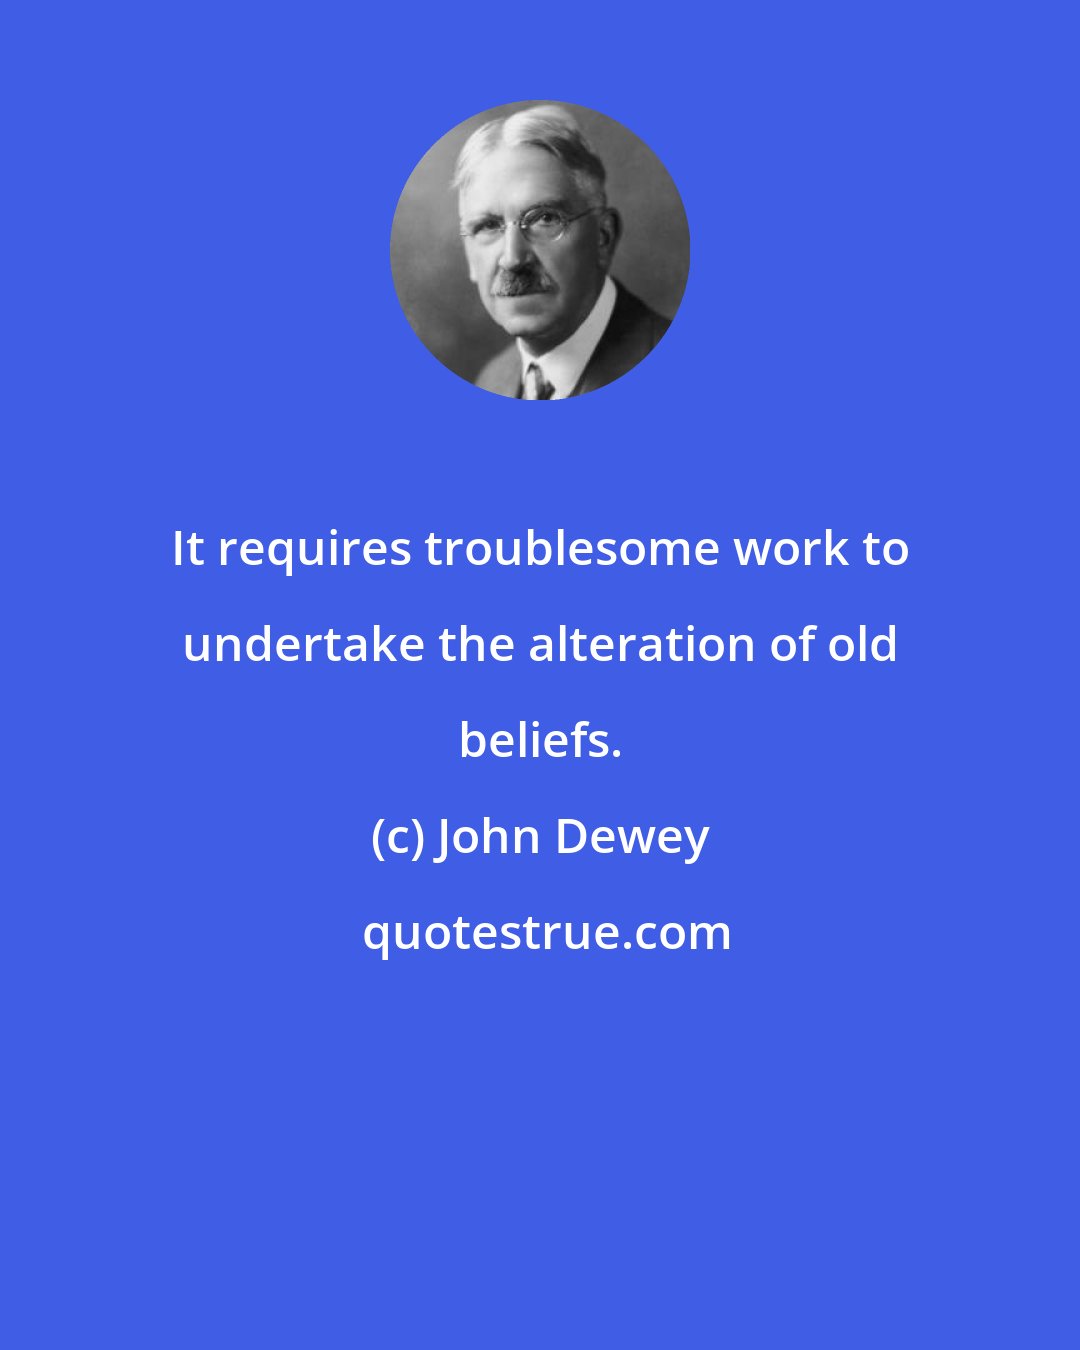 John Dewey: It requires troublesome work to undertake the alteration of old beliefs.